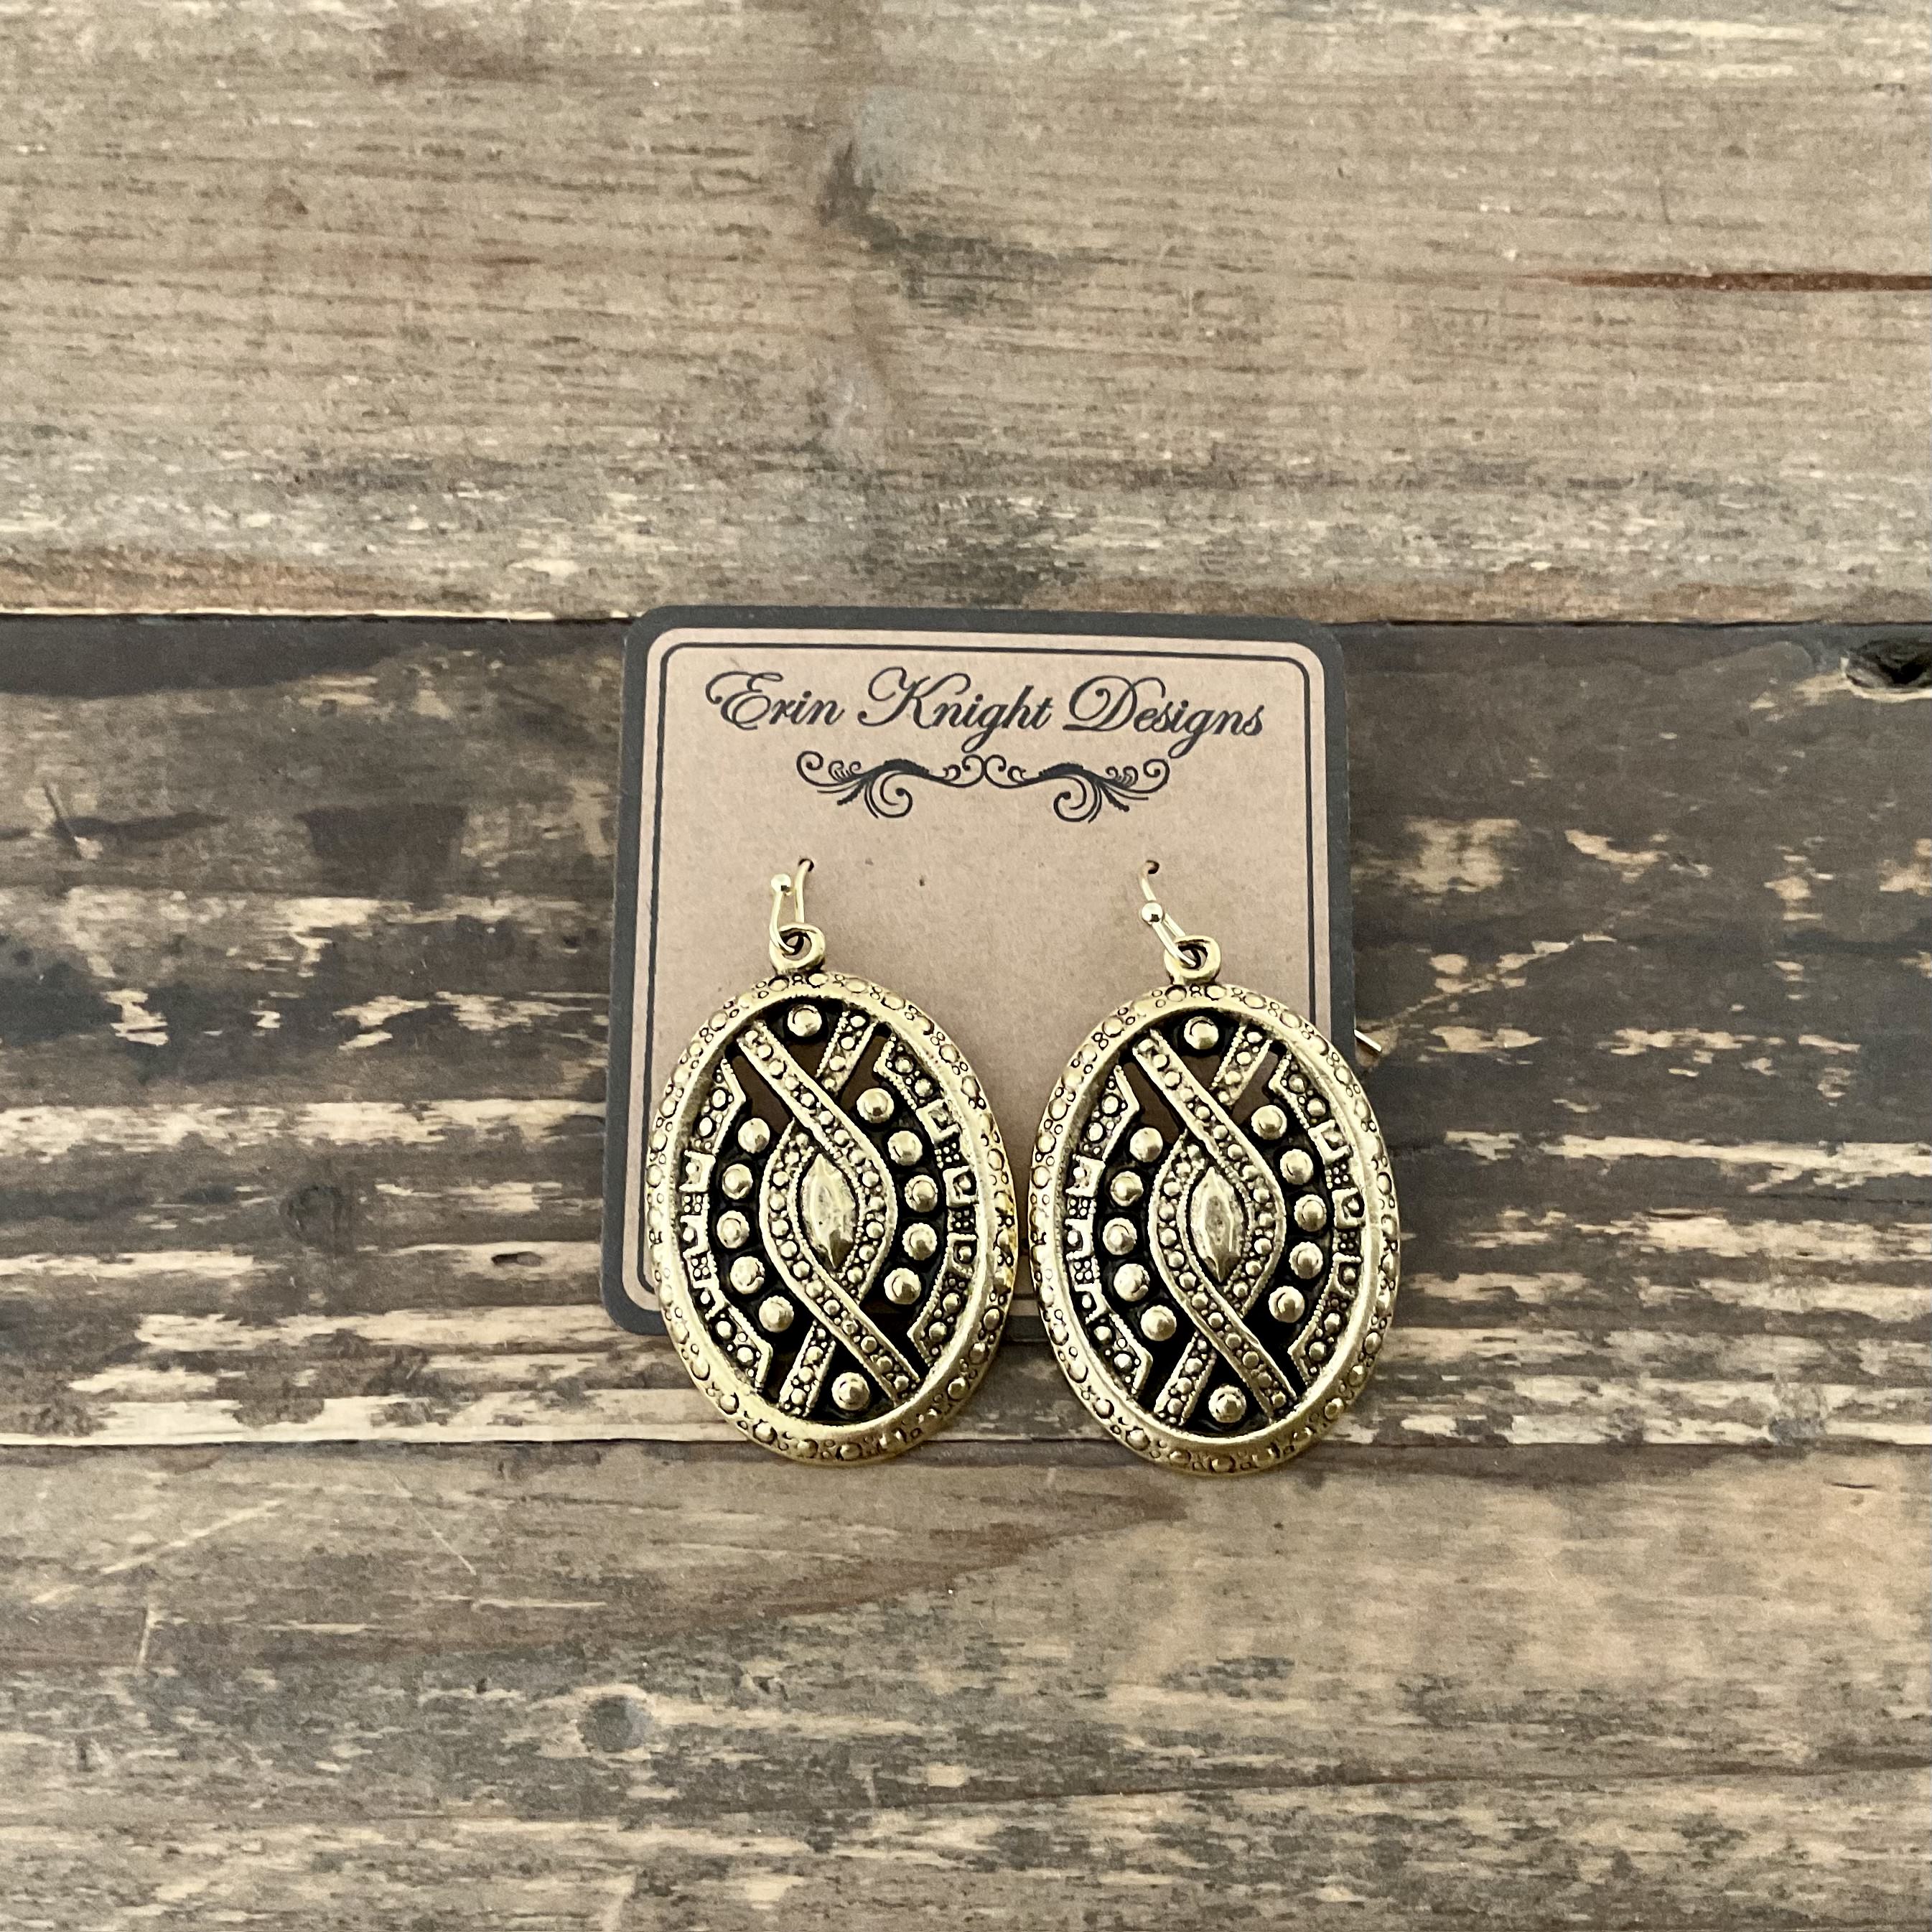 Gold Plated Vintage Reproduction Earrings